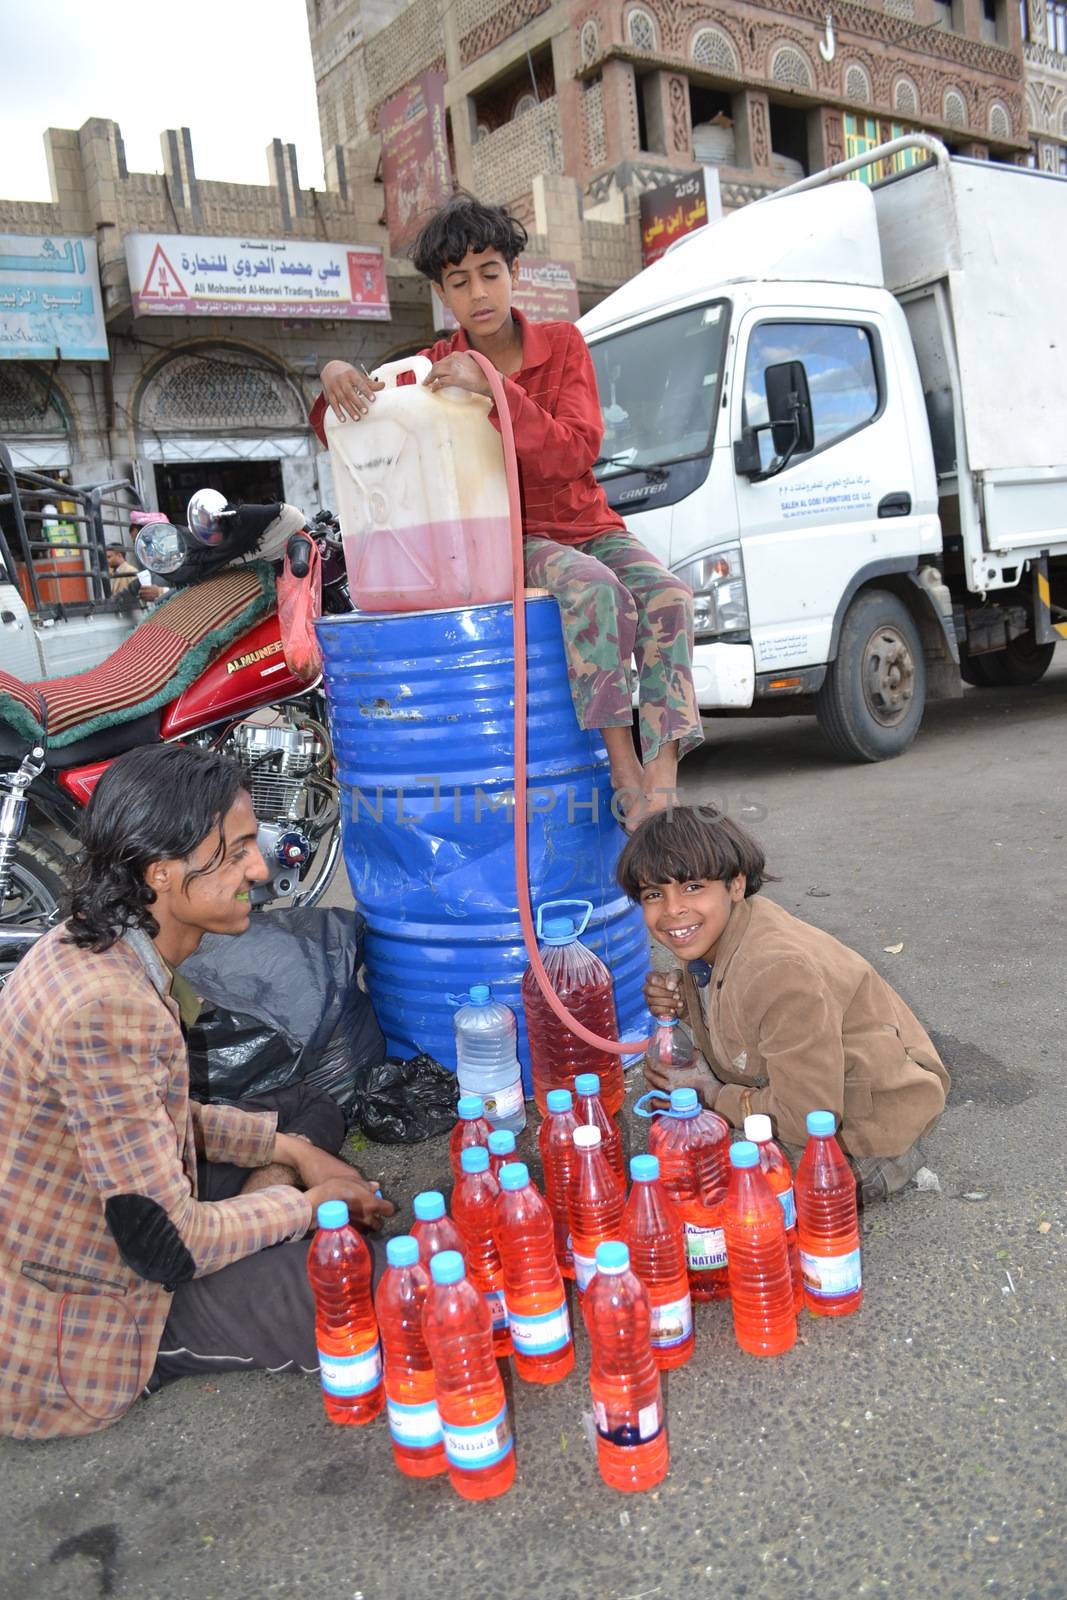 YEMEN, Sanaa: Black market dealers sell bottles of petrol in Sanaa, Yemen's capital, on November 7, 2015, as petrol stations have closed since the beginning of the war and Saudi bombings over the country.